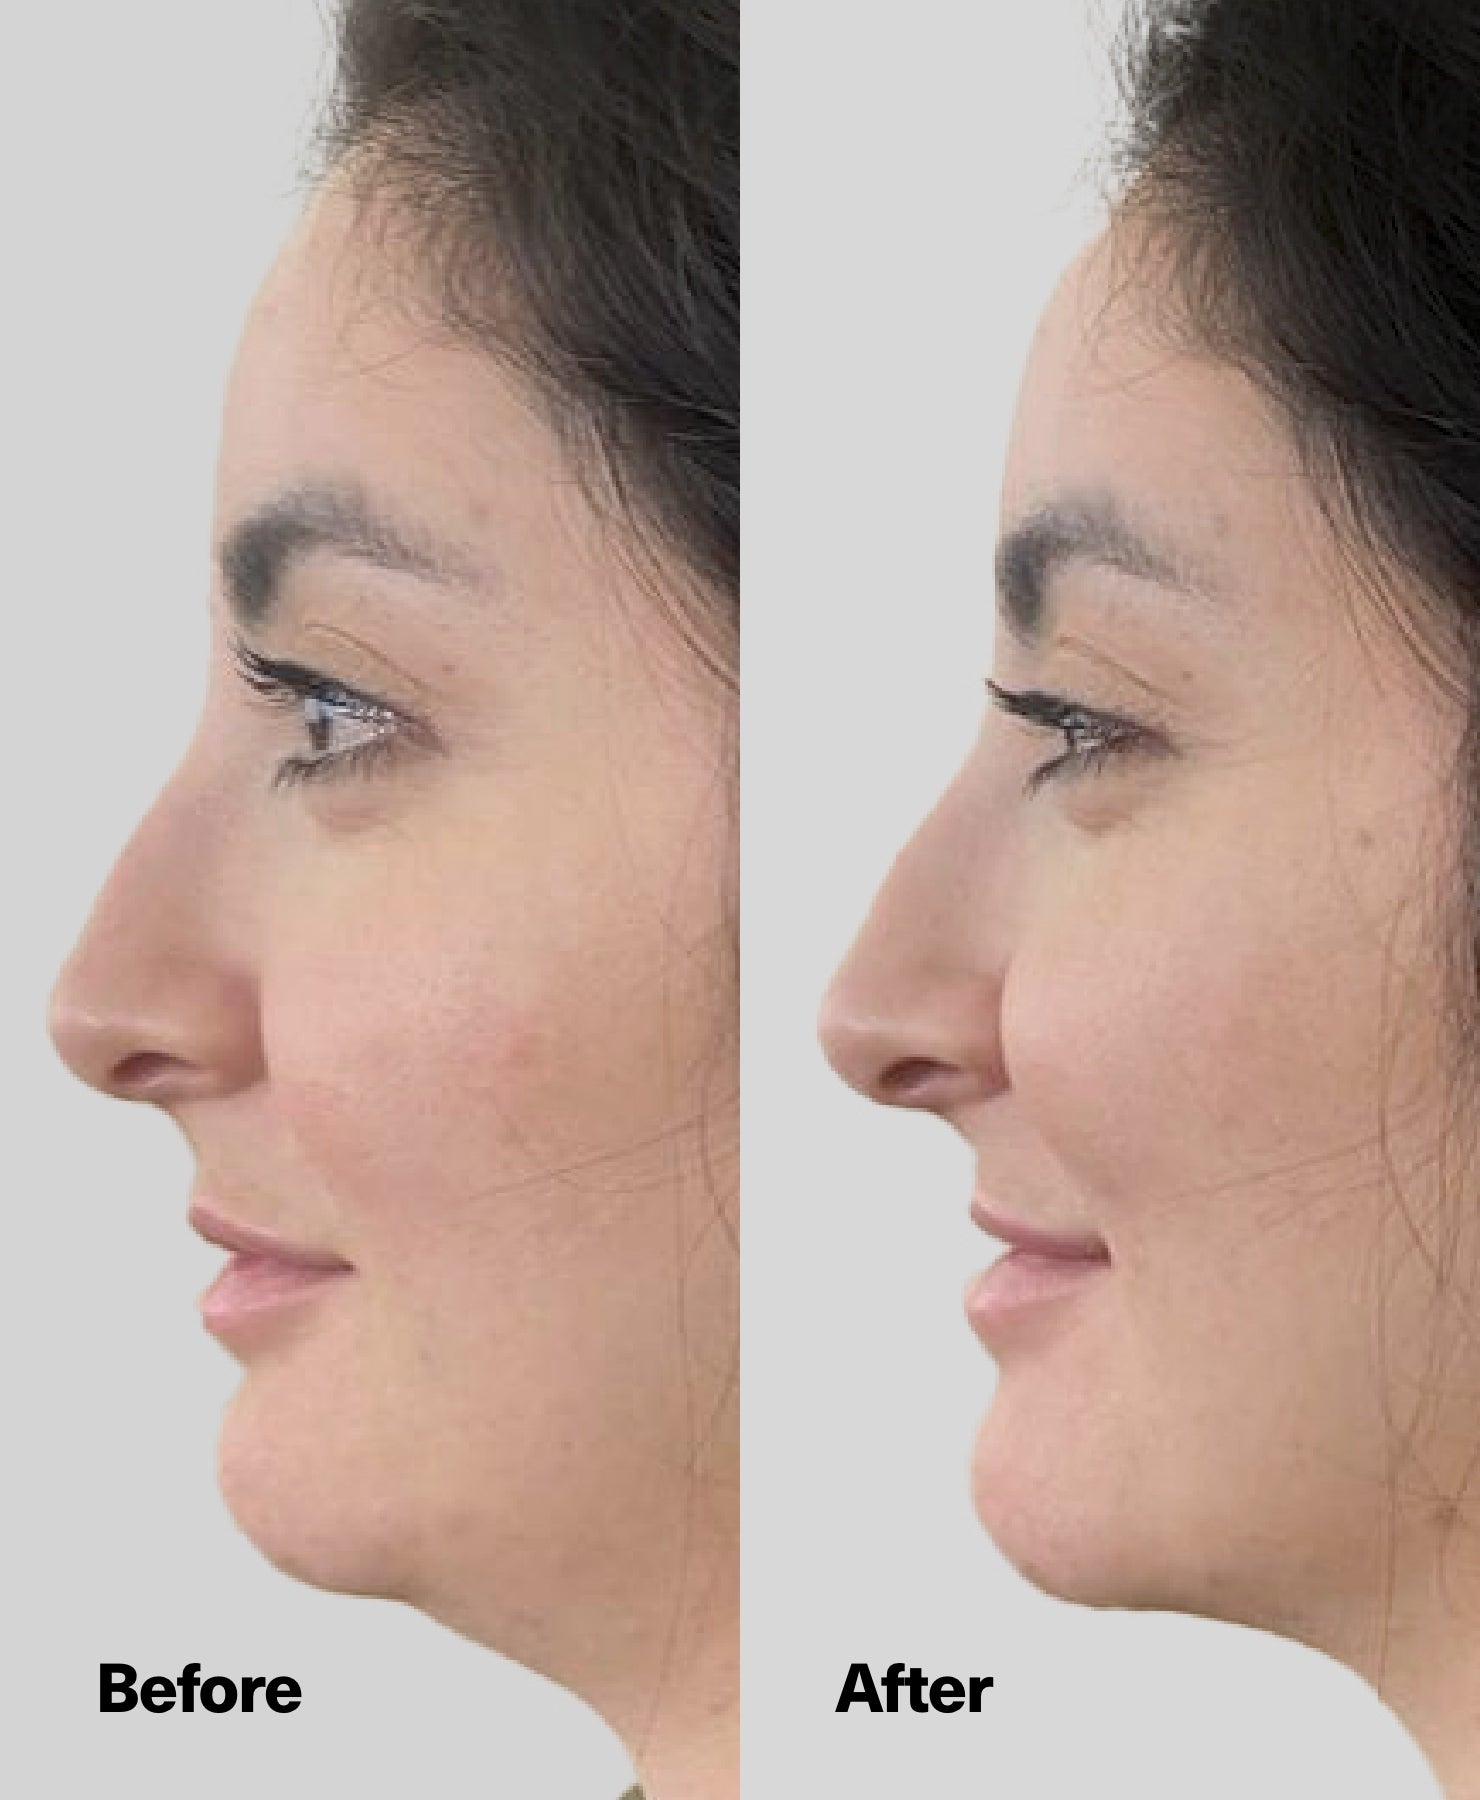 Female before and after jawline and neck results.